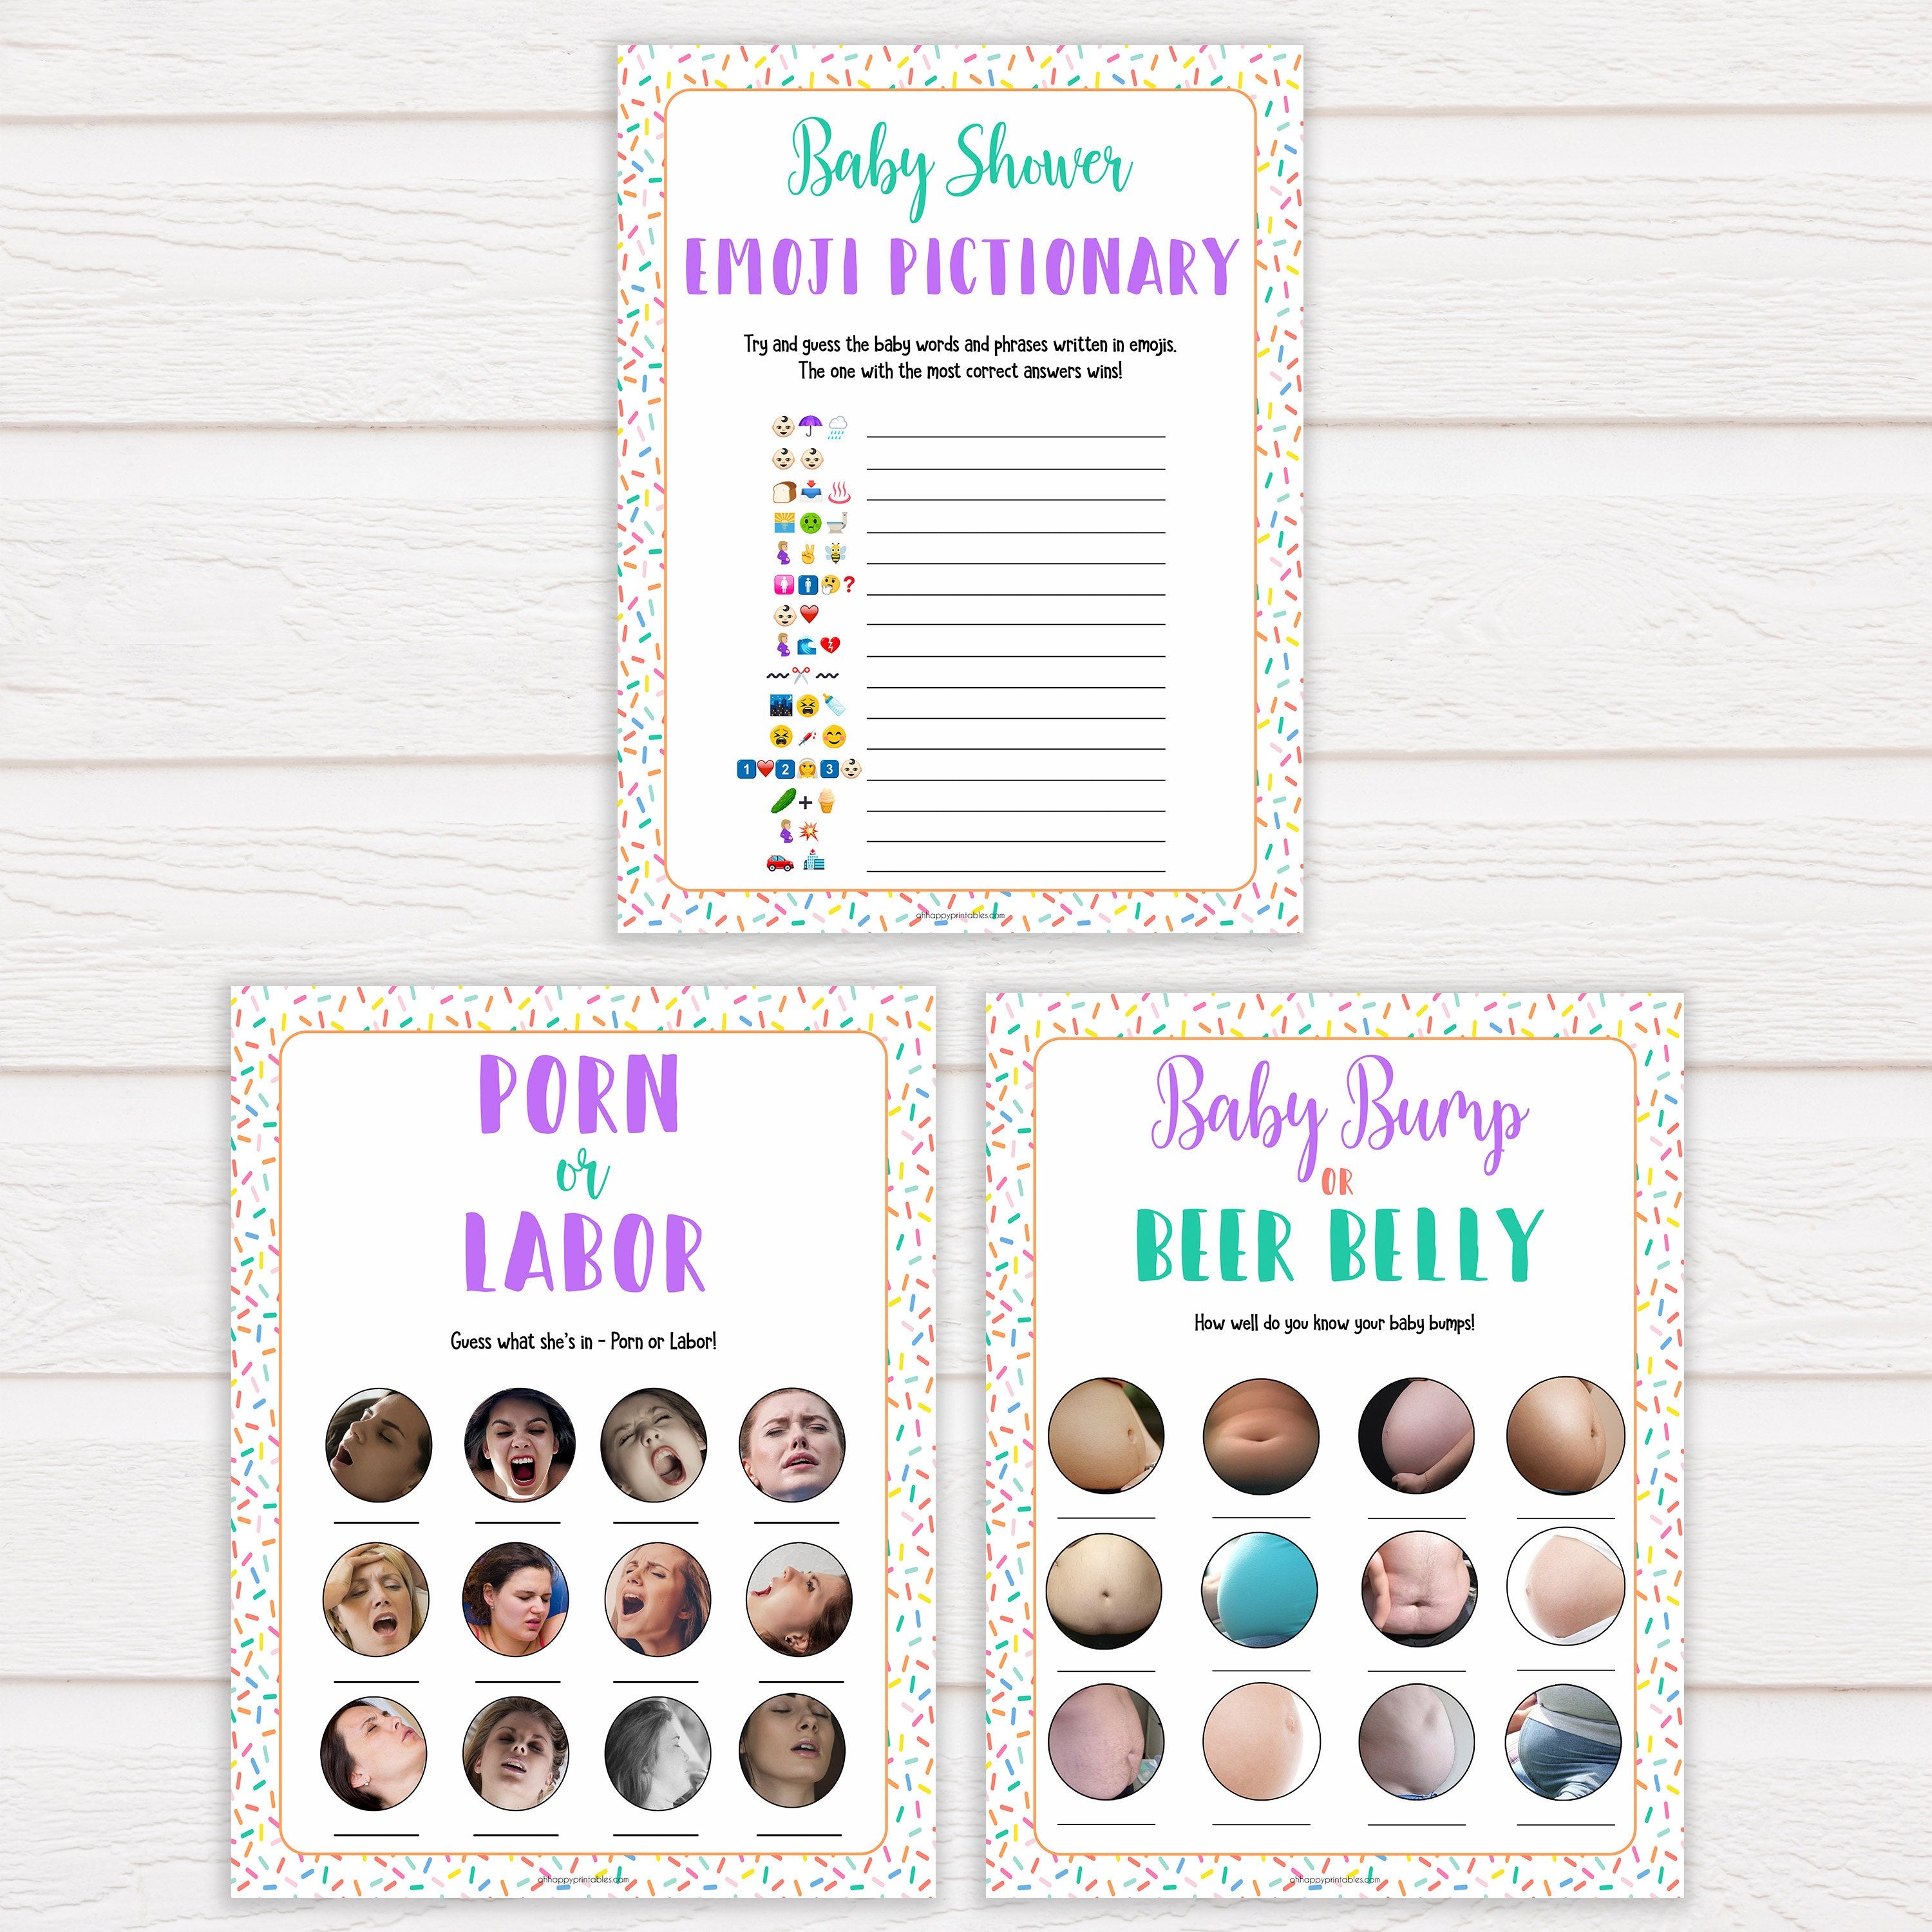 7 baby shower games, labor or porn, baby bump game, Printable baby shower games, baby sprinkle fun baby games, baby shower games, fun baby shower ideas, top baby shower ideas, sprinkle shower baby shower, friends baby shower ideas